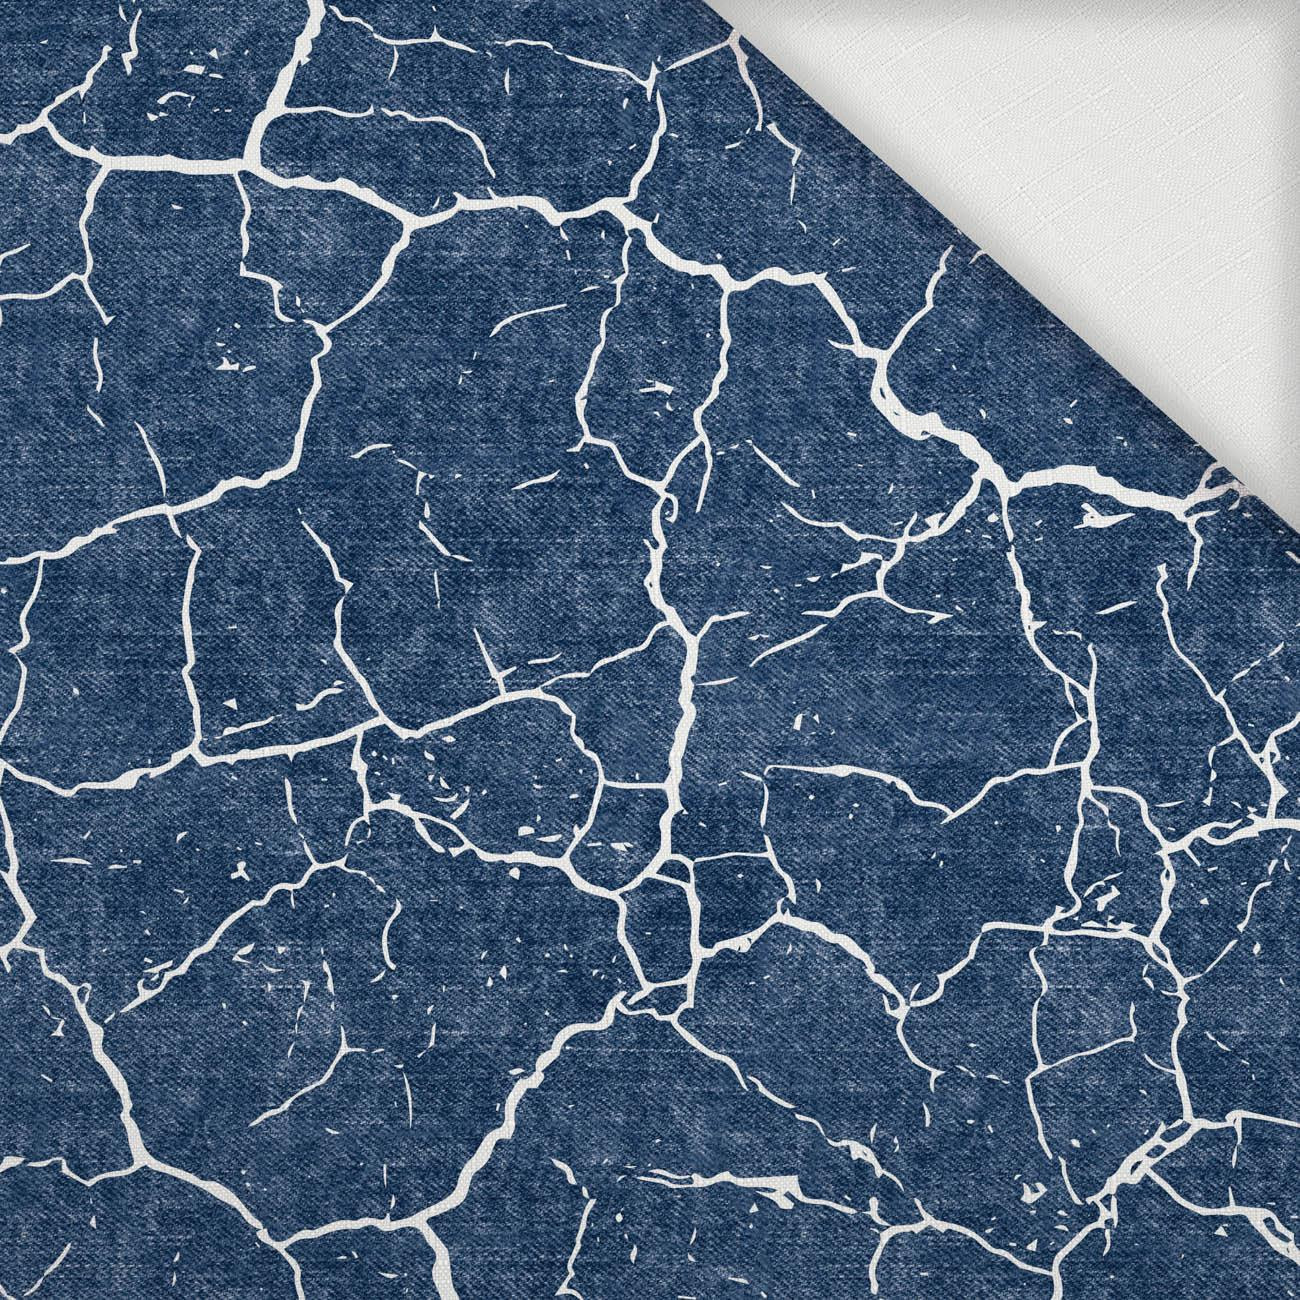 SCORCHED EARTH (white) / ACID WASH (dark blue) - Woven Fabric for tablecloths